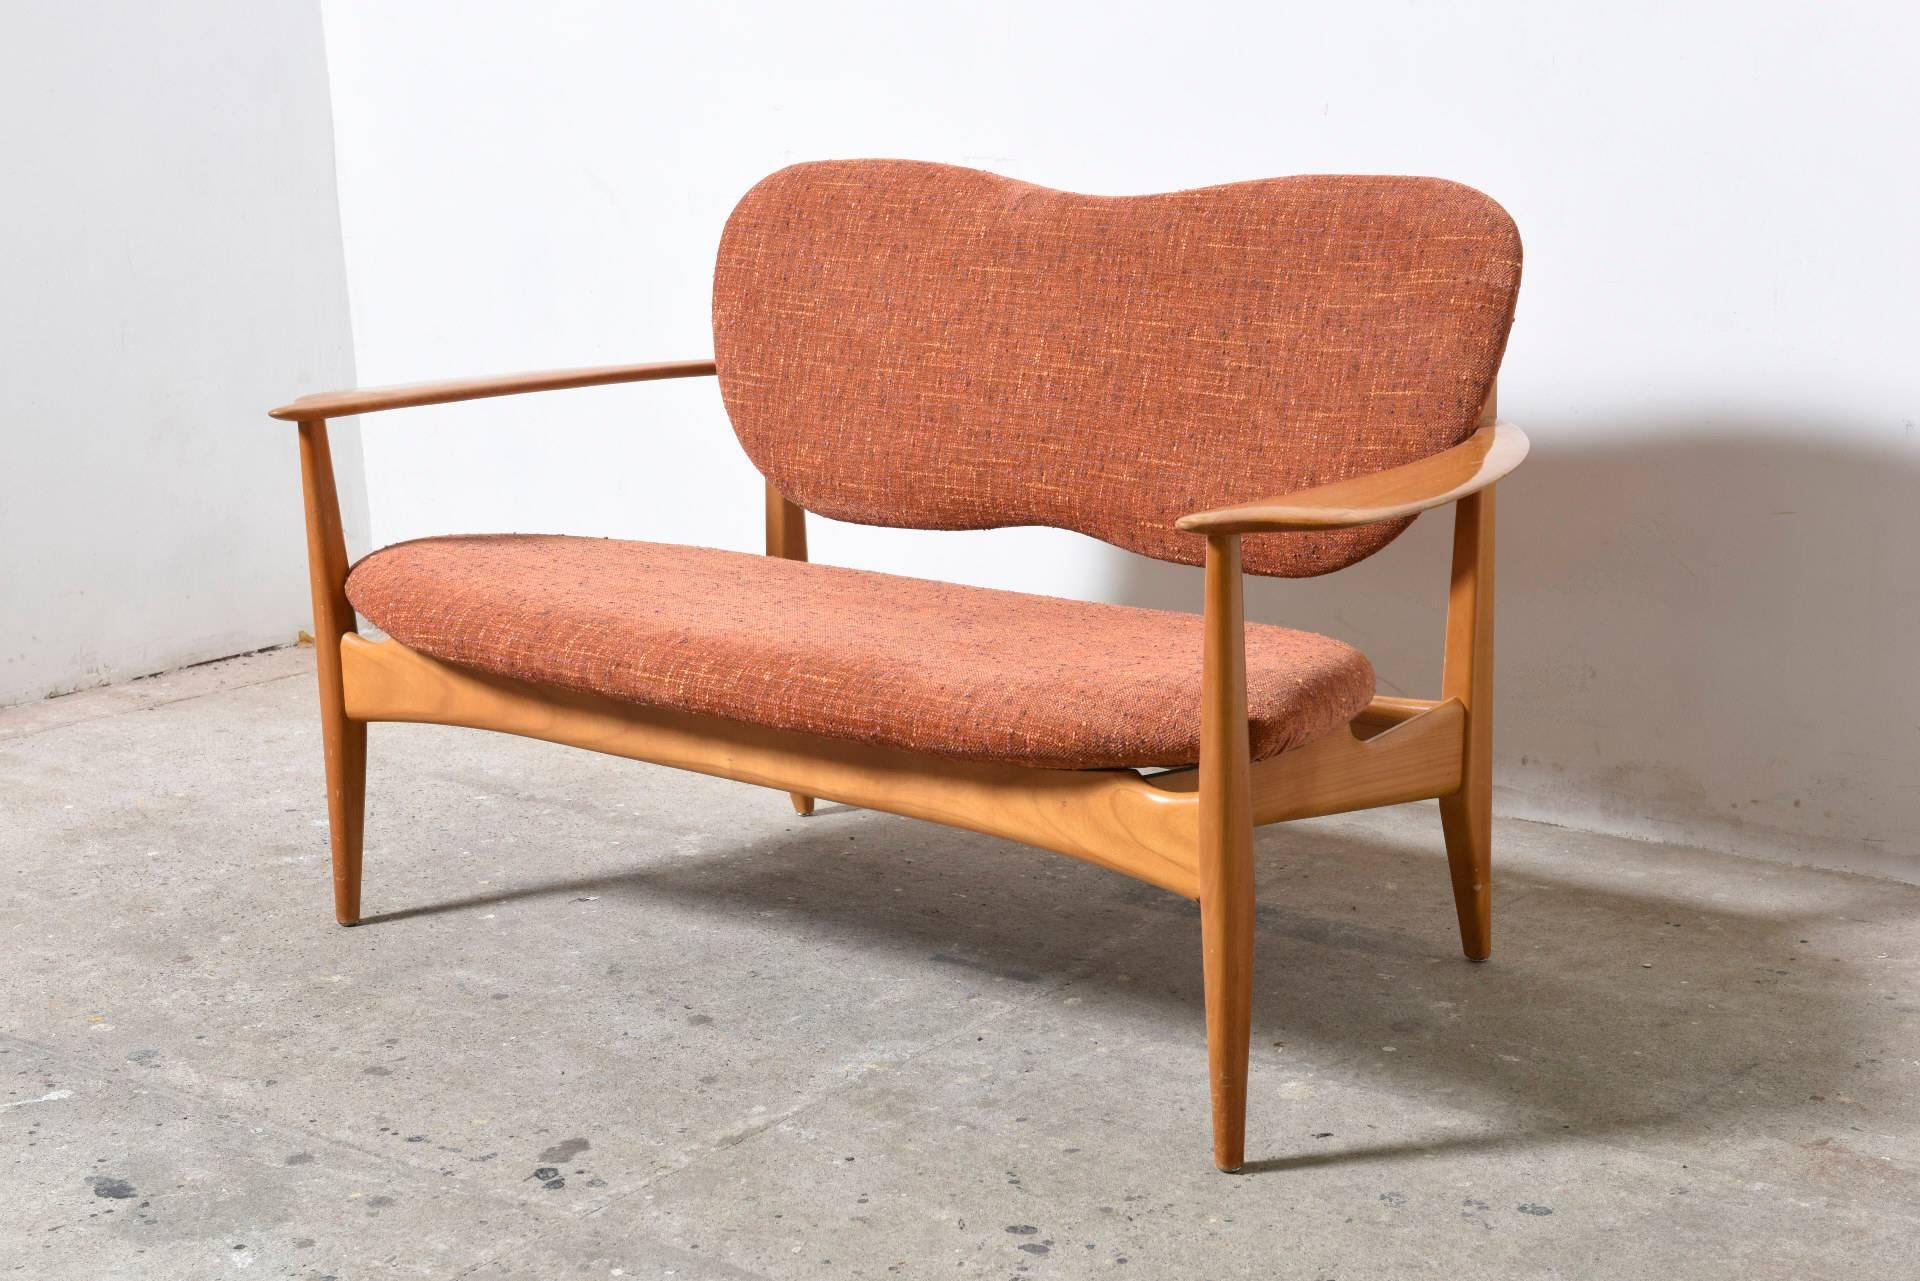 This rare sofa was designed during the 1950s
It features a frame made from a nice warm cherrywood and upholstered with a soft original fabric.

Be sure to check out the matching loveseat and two easy chairs we have in stock.